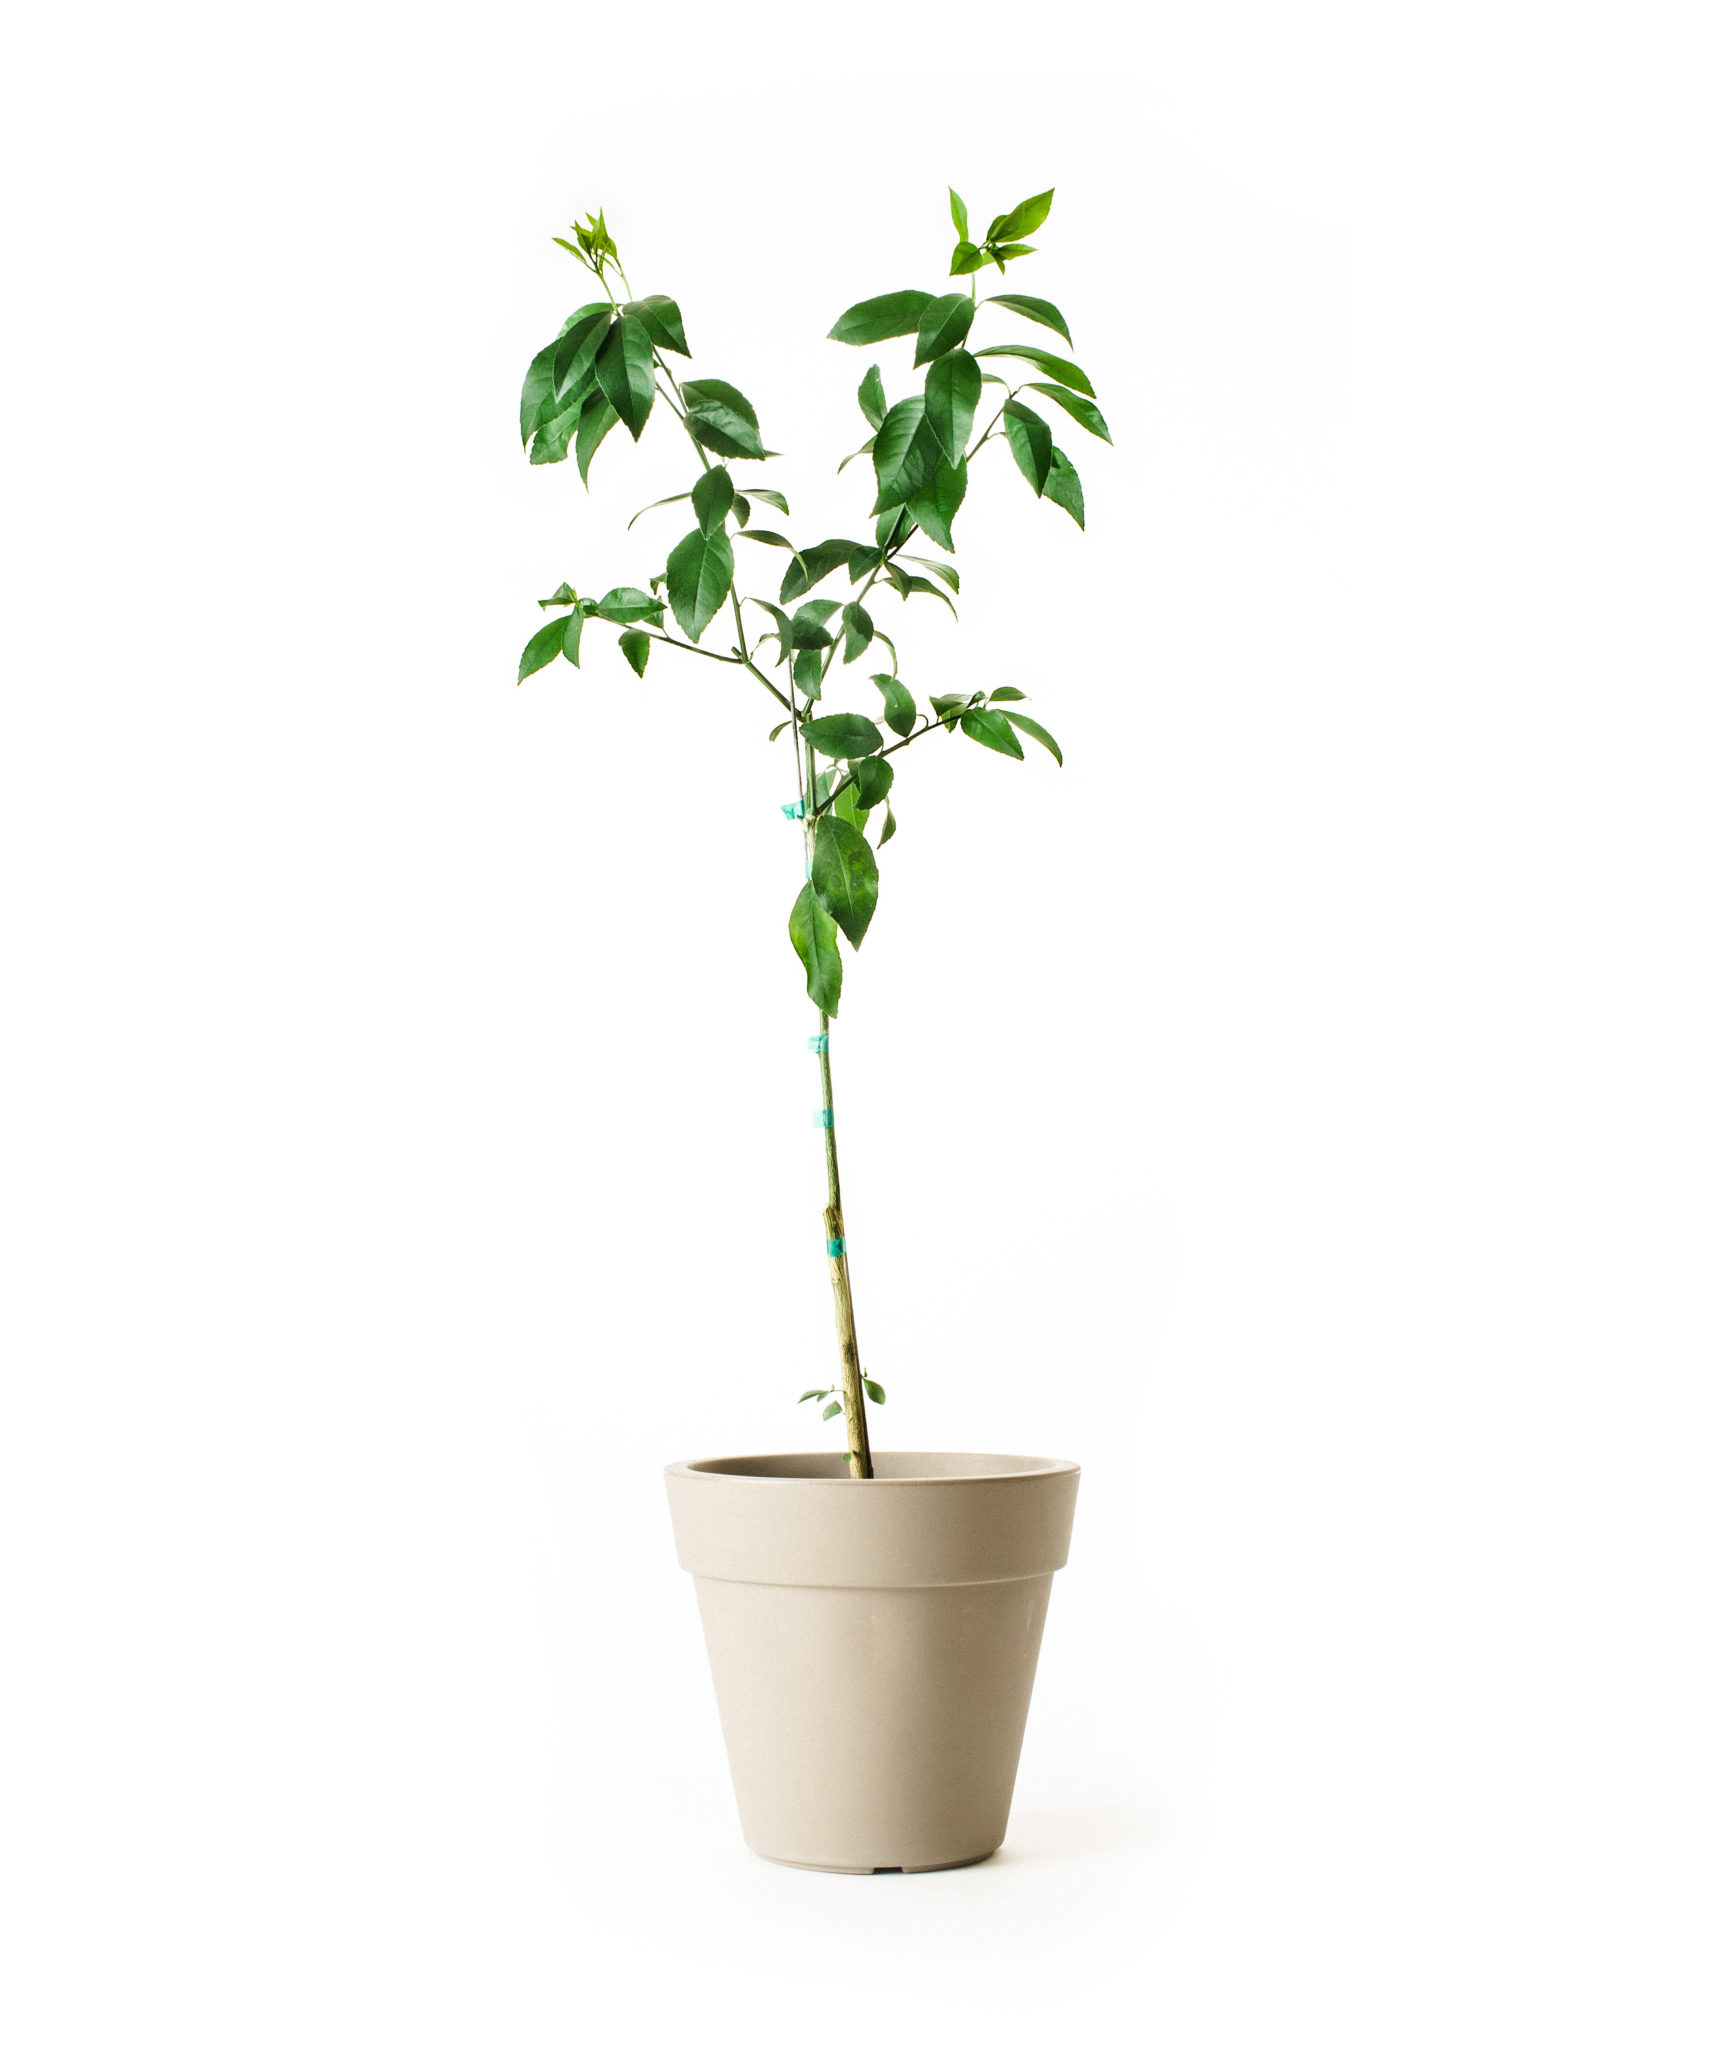 Image of Improved Meyer Lemon Tree (Age: 4 - 5 Years Height: 3 - 4 FT Ship Method: Delivery)